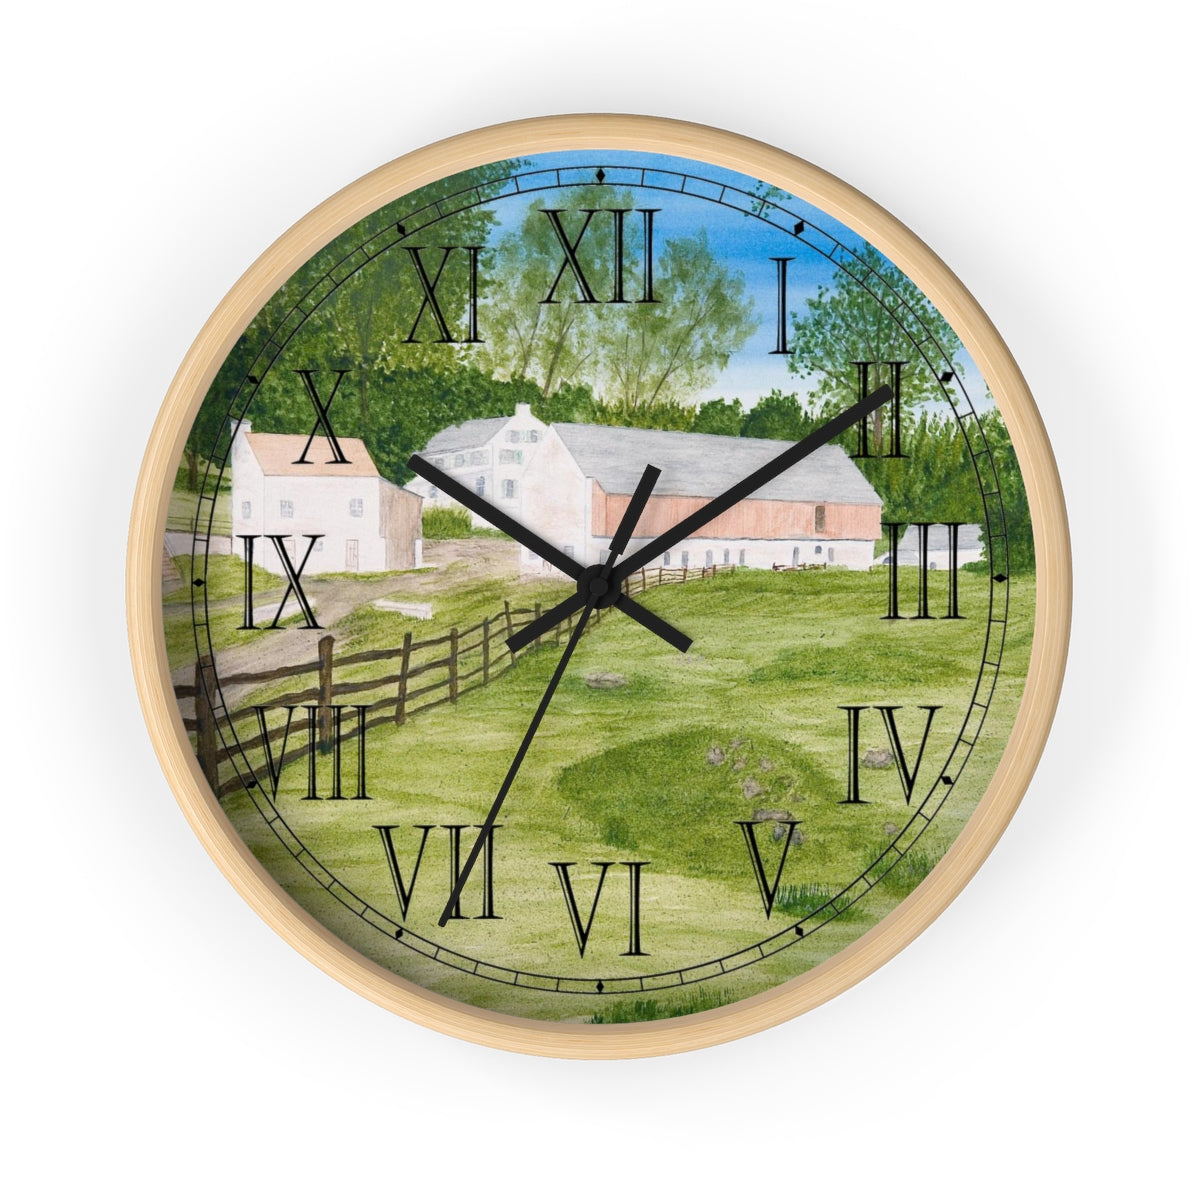 French Creek State Park in Pennsylvania provides the peaceful setting for this restful scene. The clock features Roman Numerals that add to the classic, bygone days nature of this setting. You'll enjoy the country charm of this clock in any room in your home. Country friends and lovers of farm house decor will welcome this clock as a thoughtful gift.      The image in the clock design is a reproduction of an original watercolor by Lee M. Buchanan. 